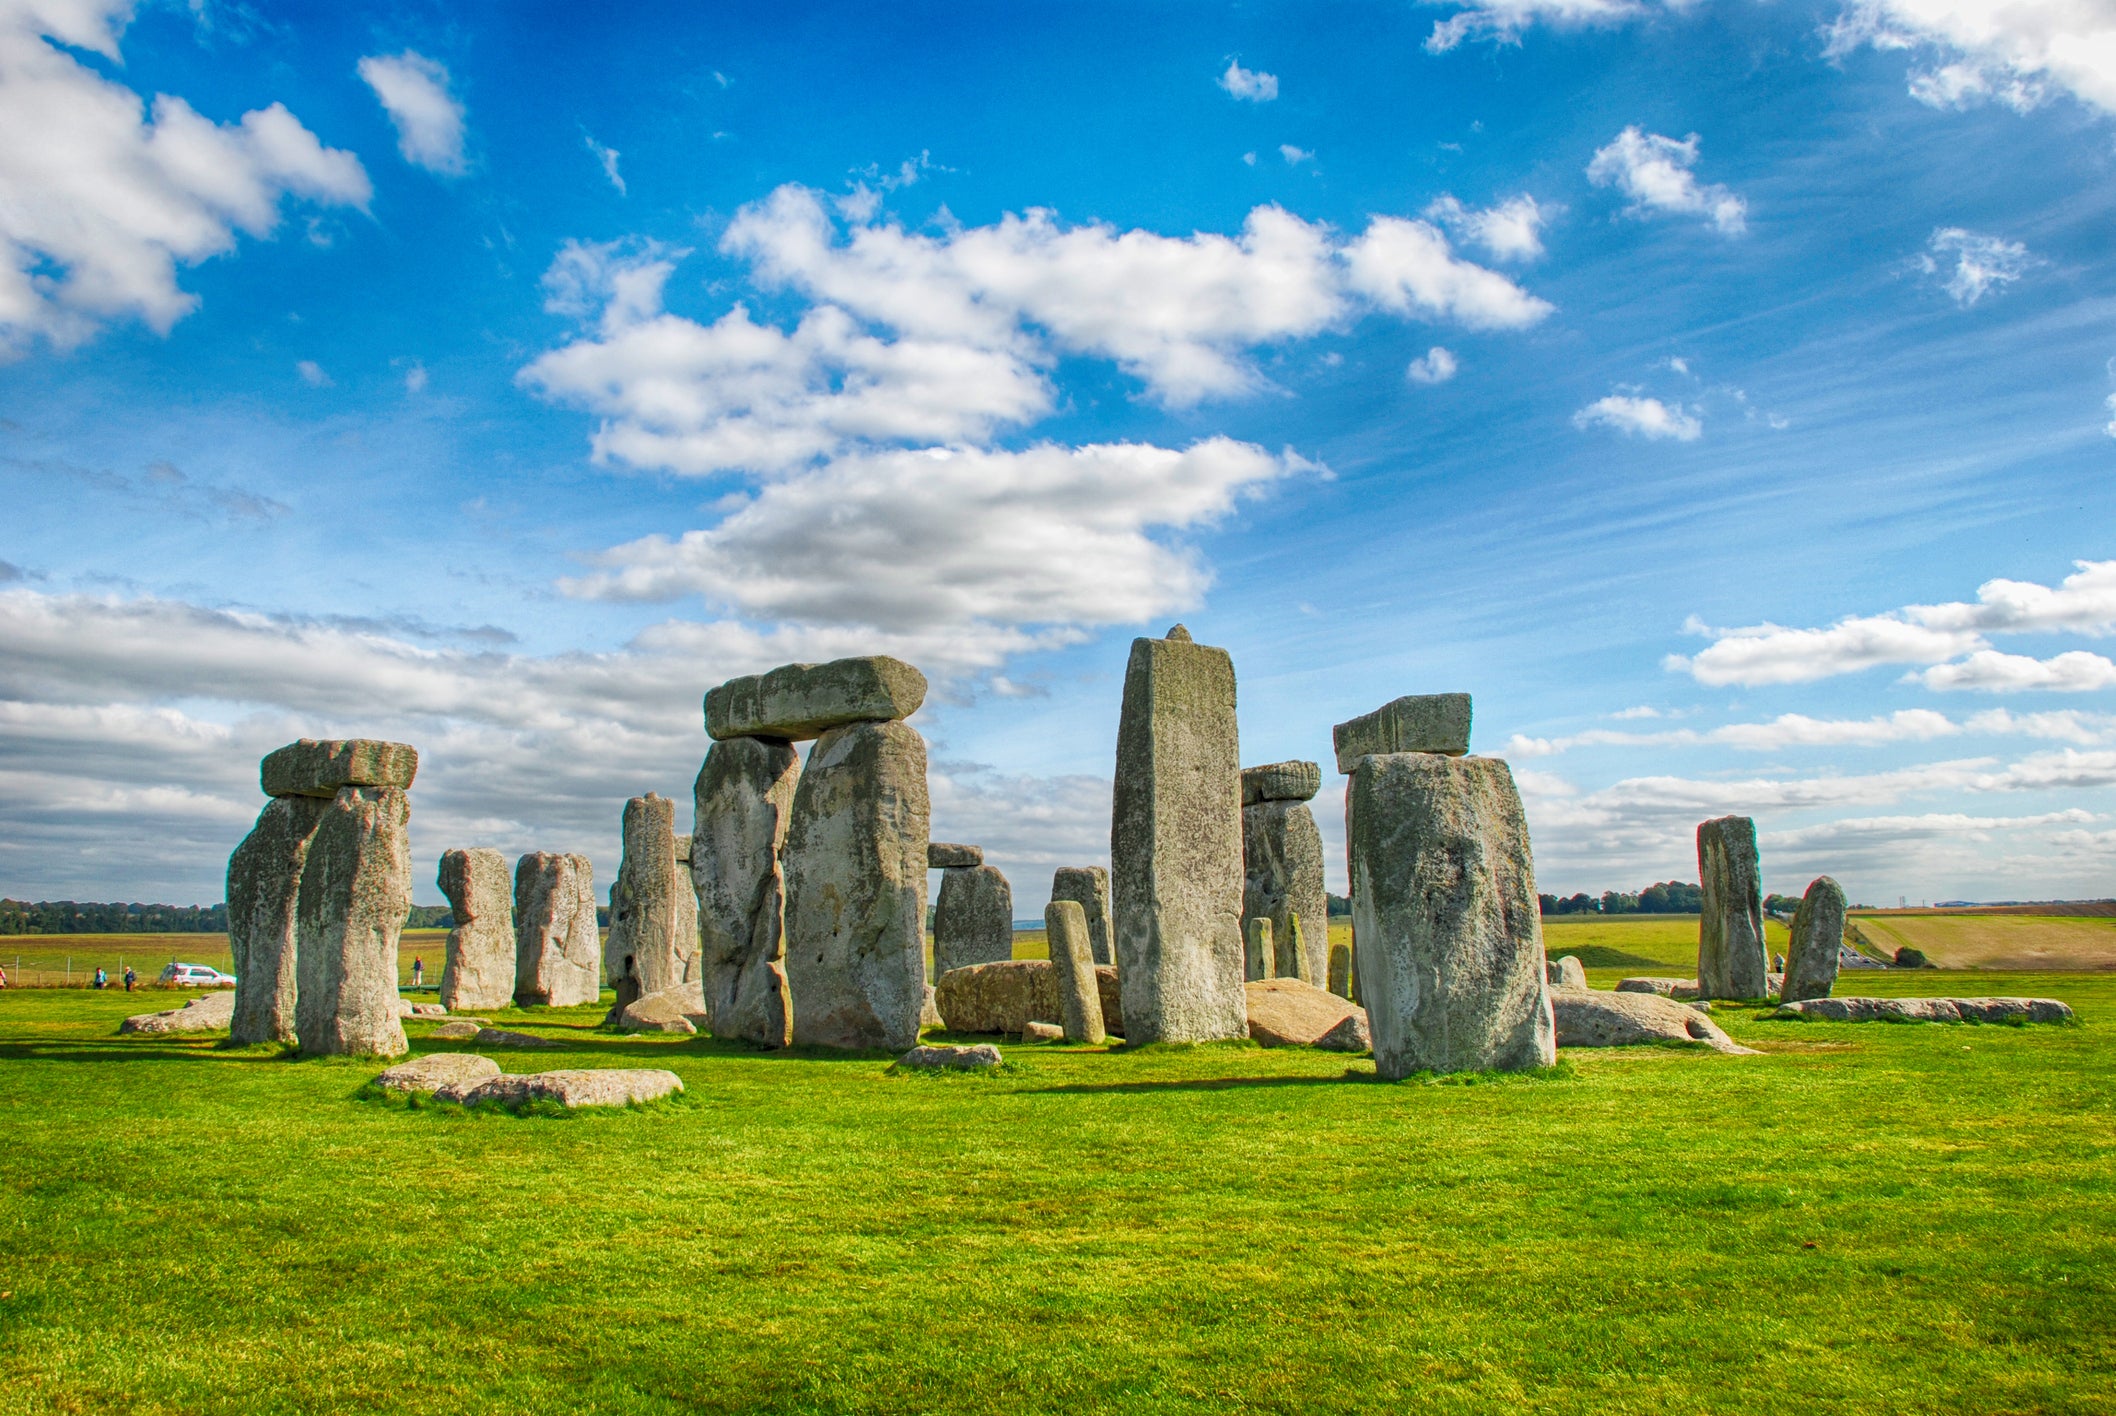 Stonehenge remains one of the UK’s most recognisable landmarks